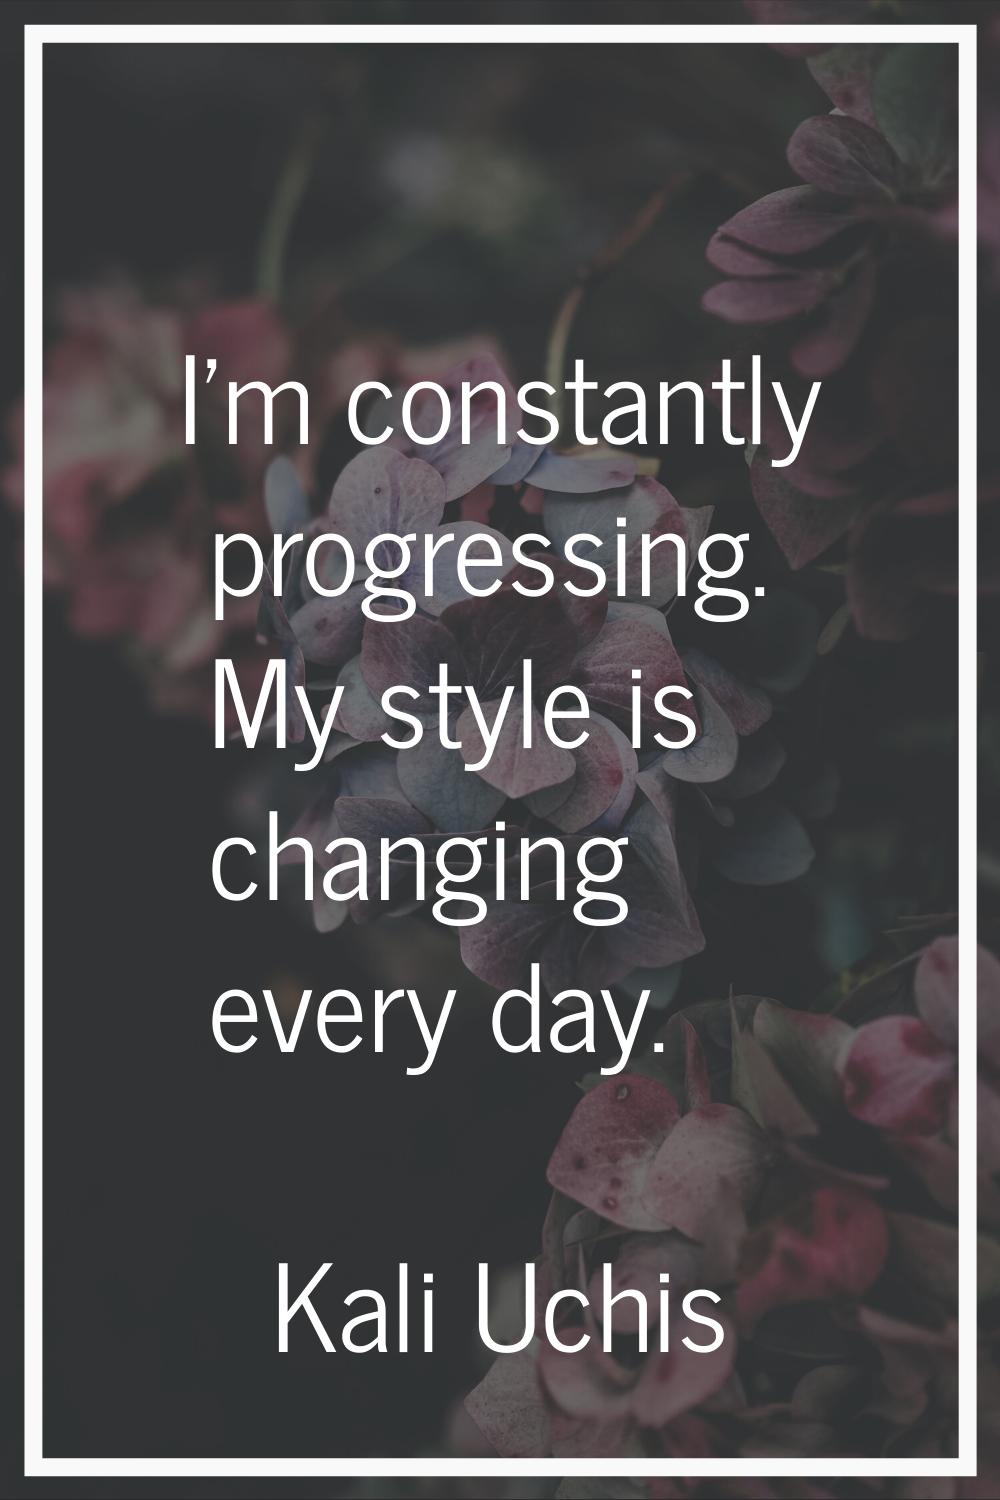 I'm constantly progressing. My style is changing every day.